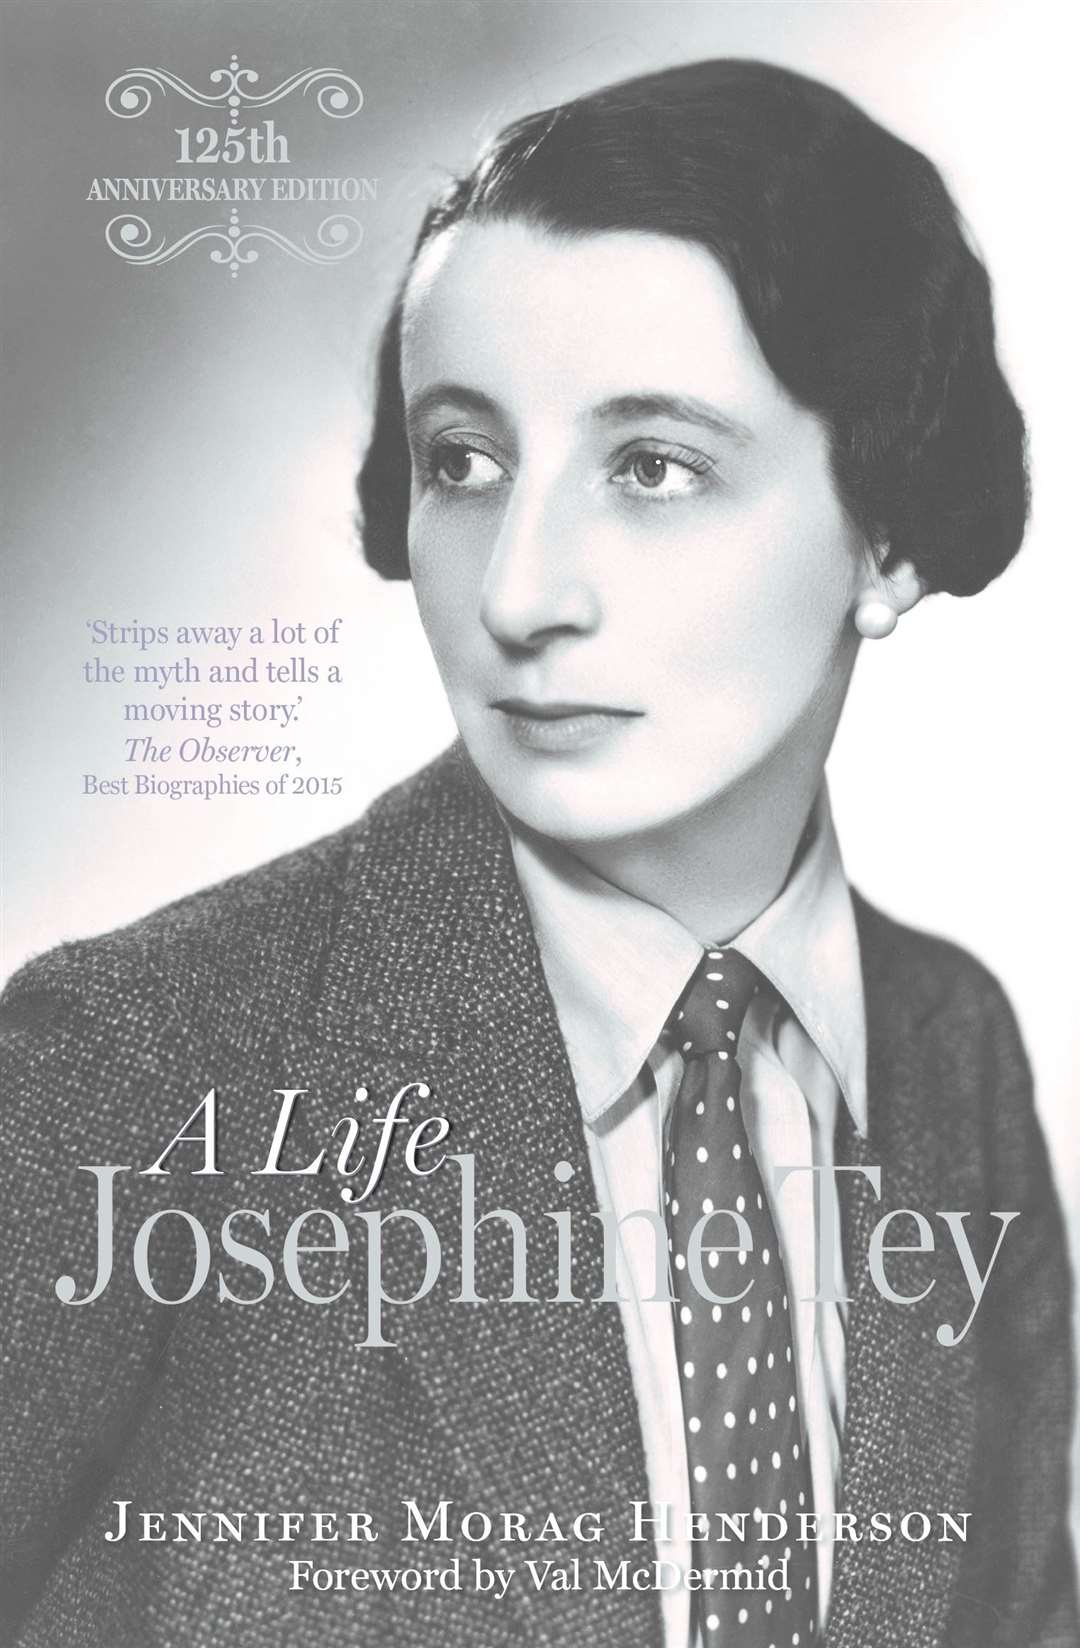 The new edition of the book about Josephine Tey's life.